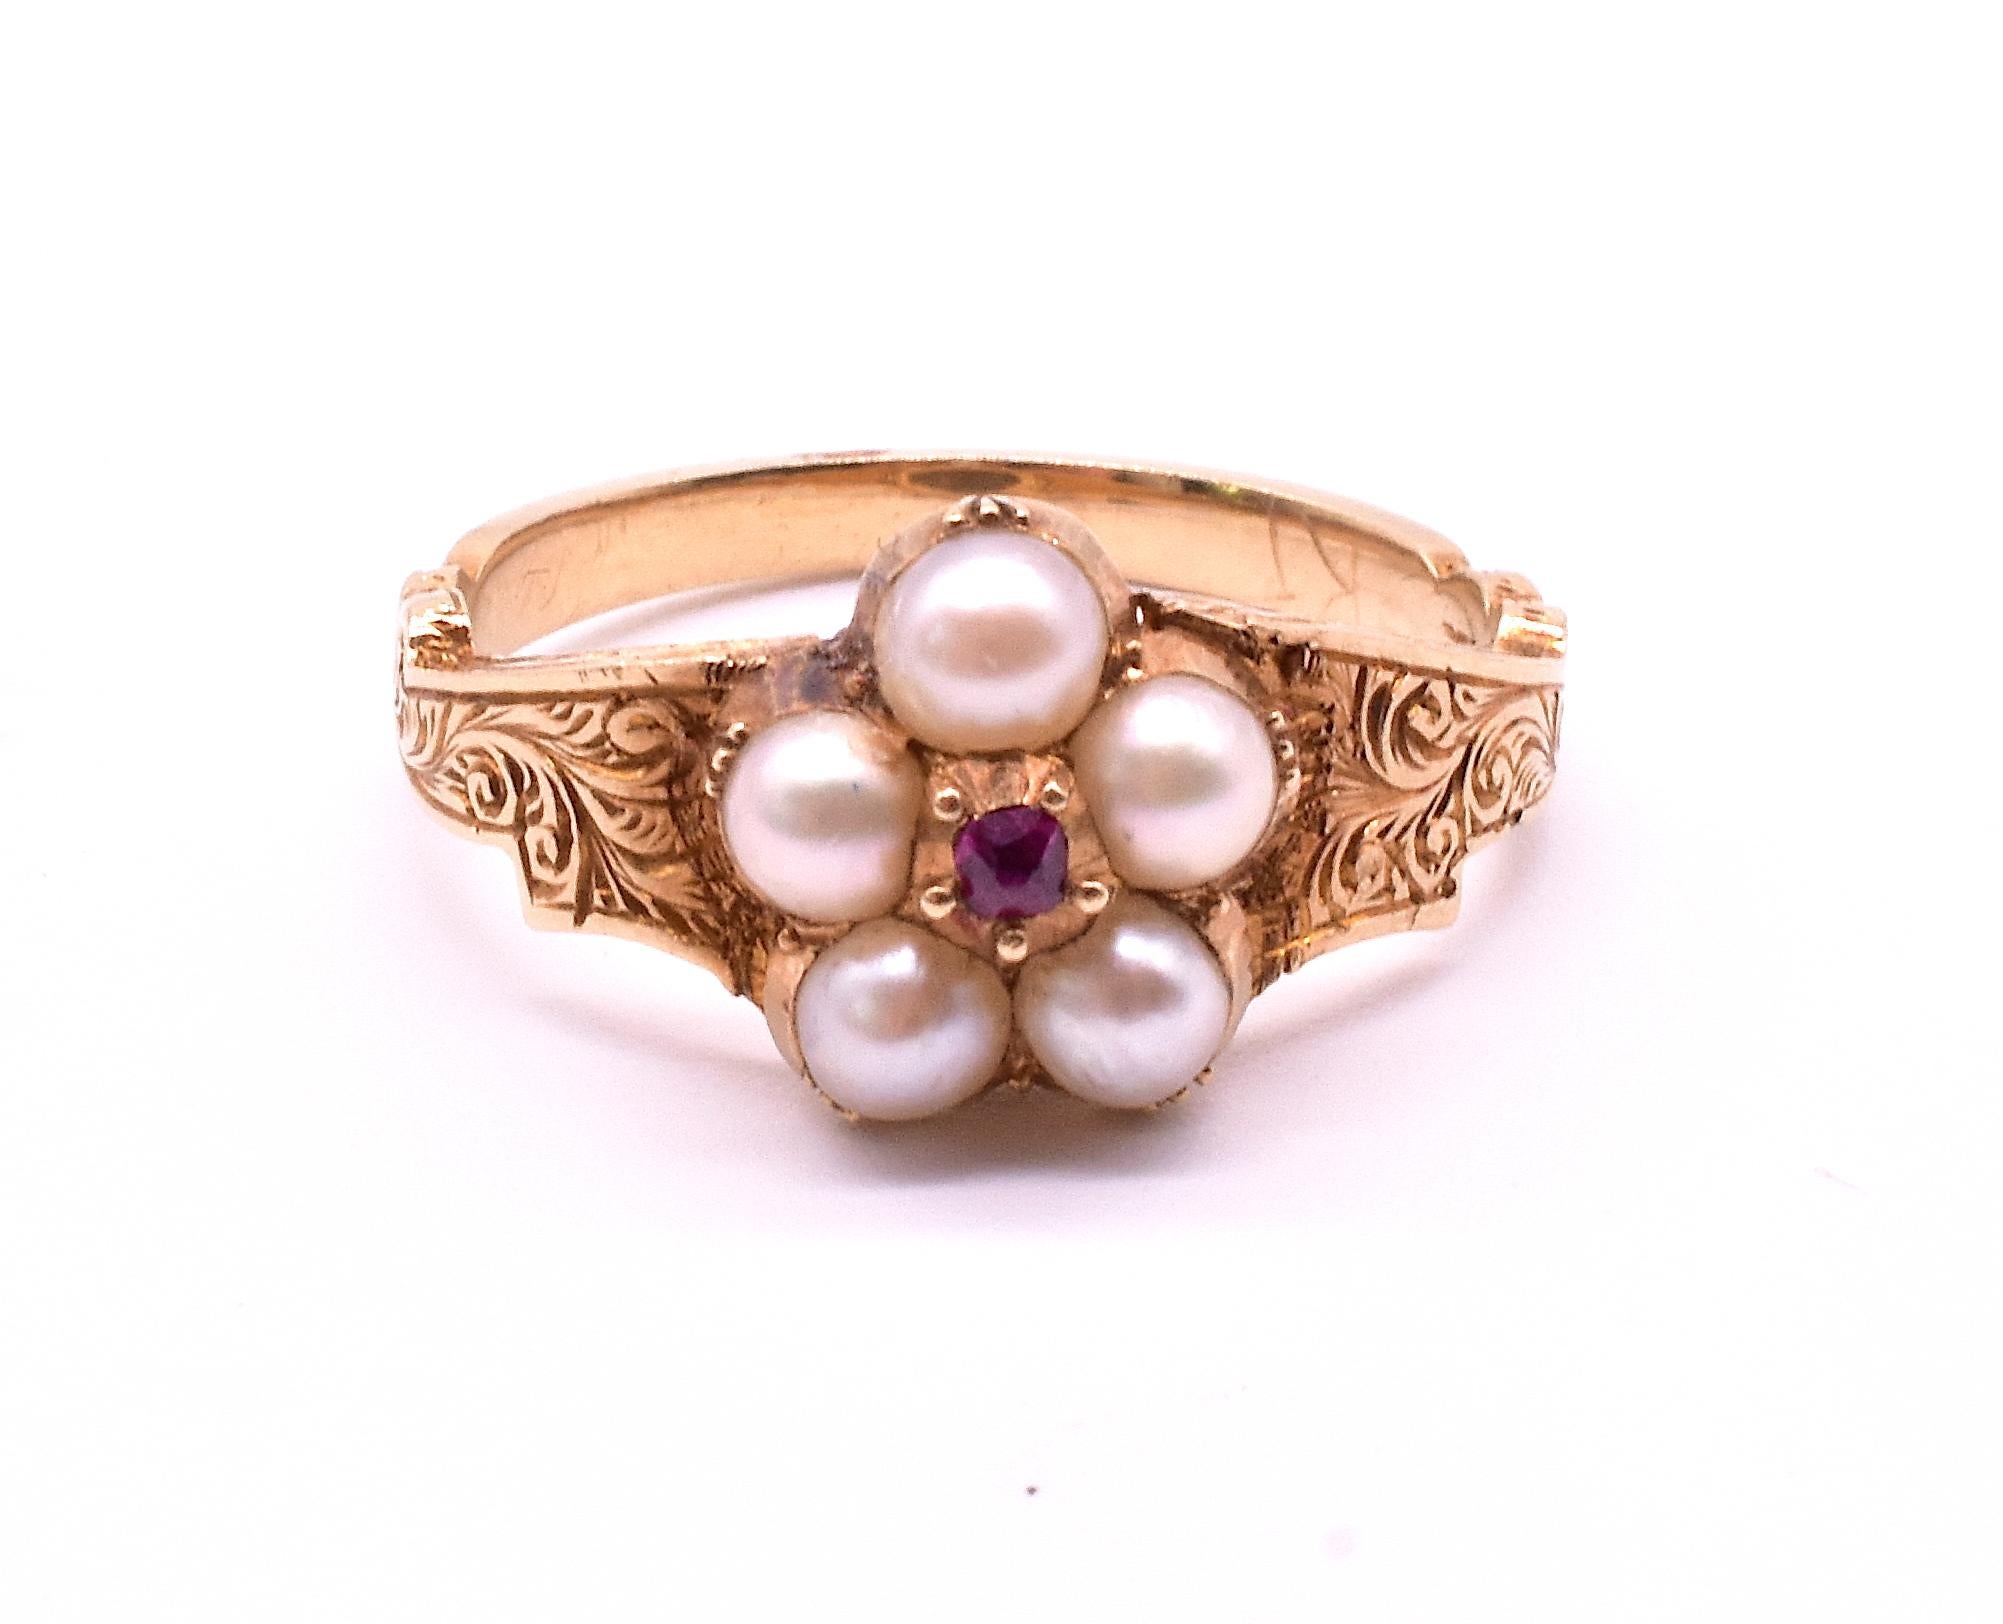 18K pearl forget me not ring with  five well matched natural white pearls in a forget-me-not arrangement with a center ruby, is awash in sentiment. The pearls indicate remembrance We love this delicate sentimental ring with its ornate band